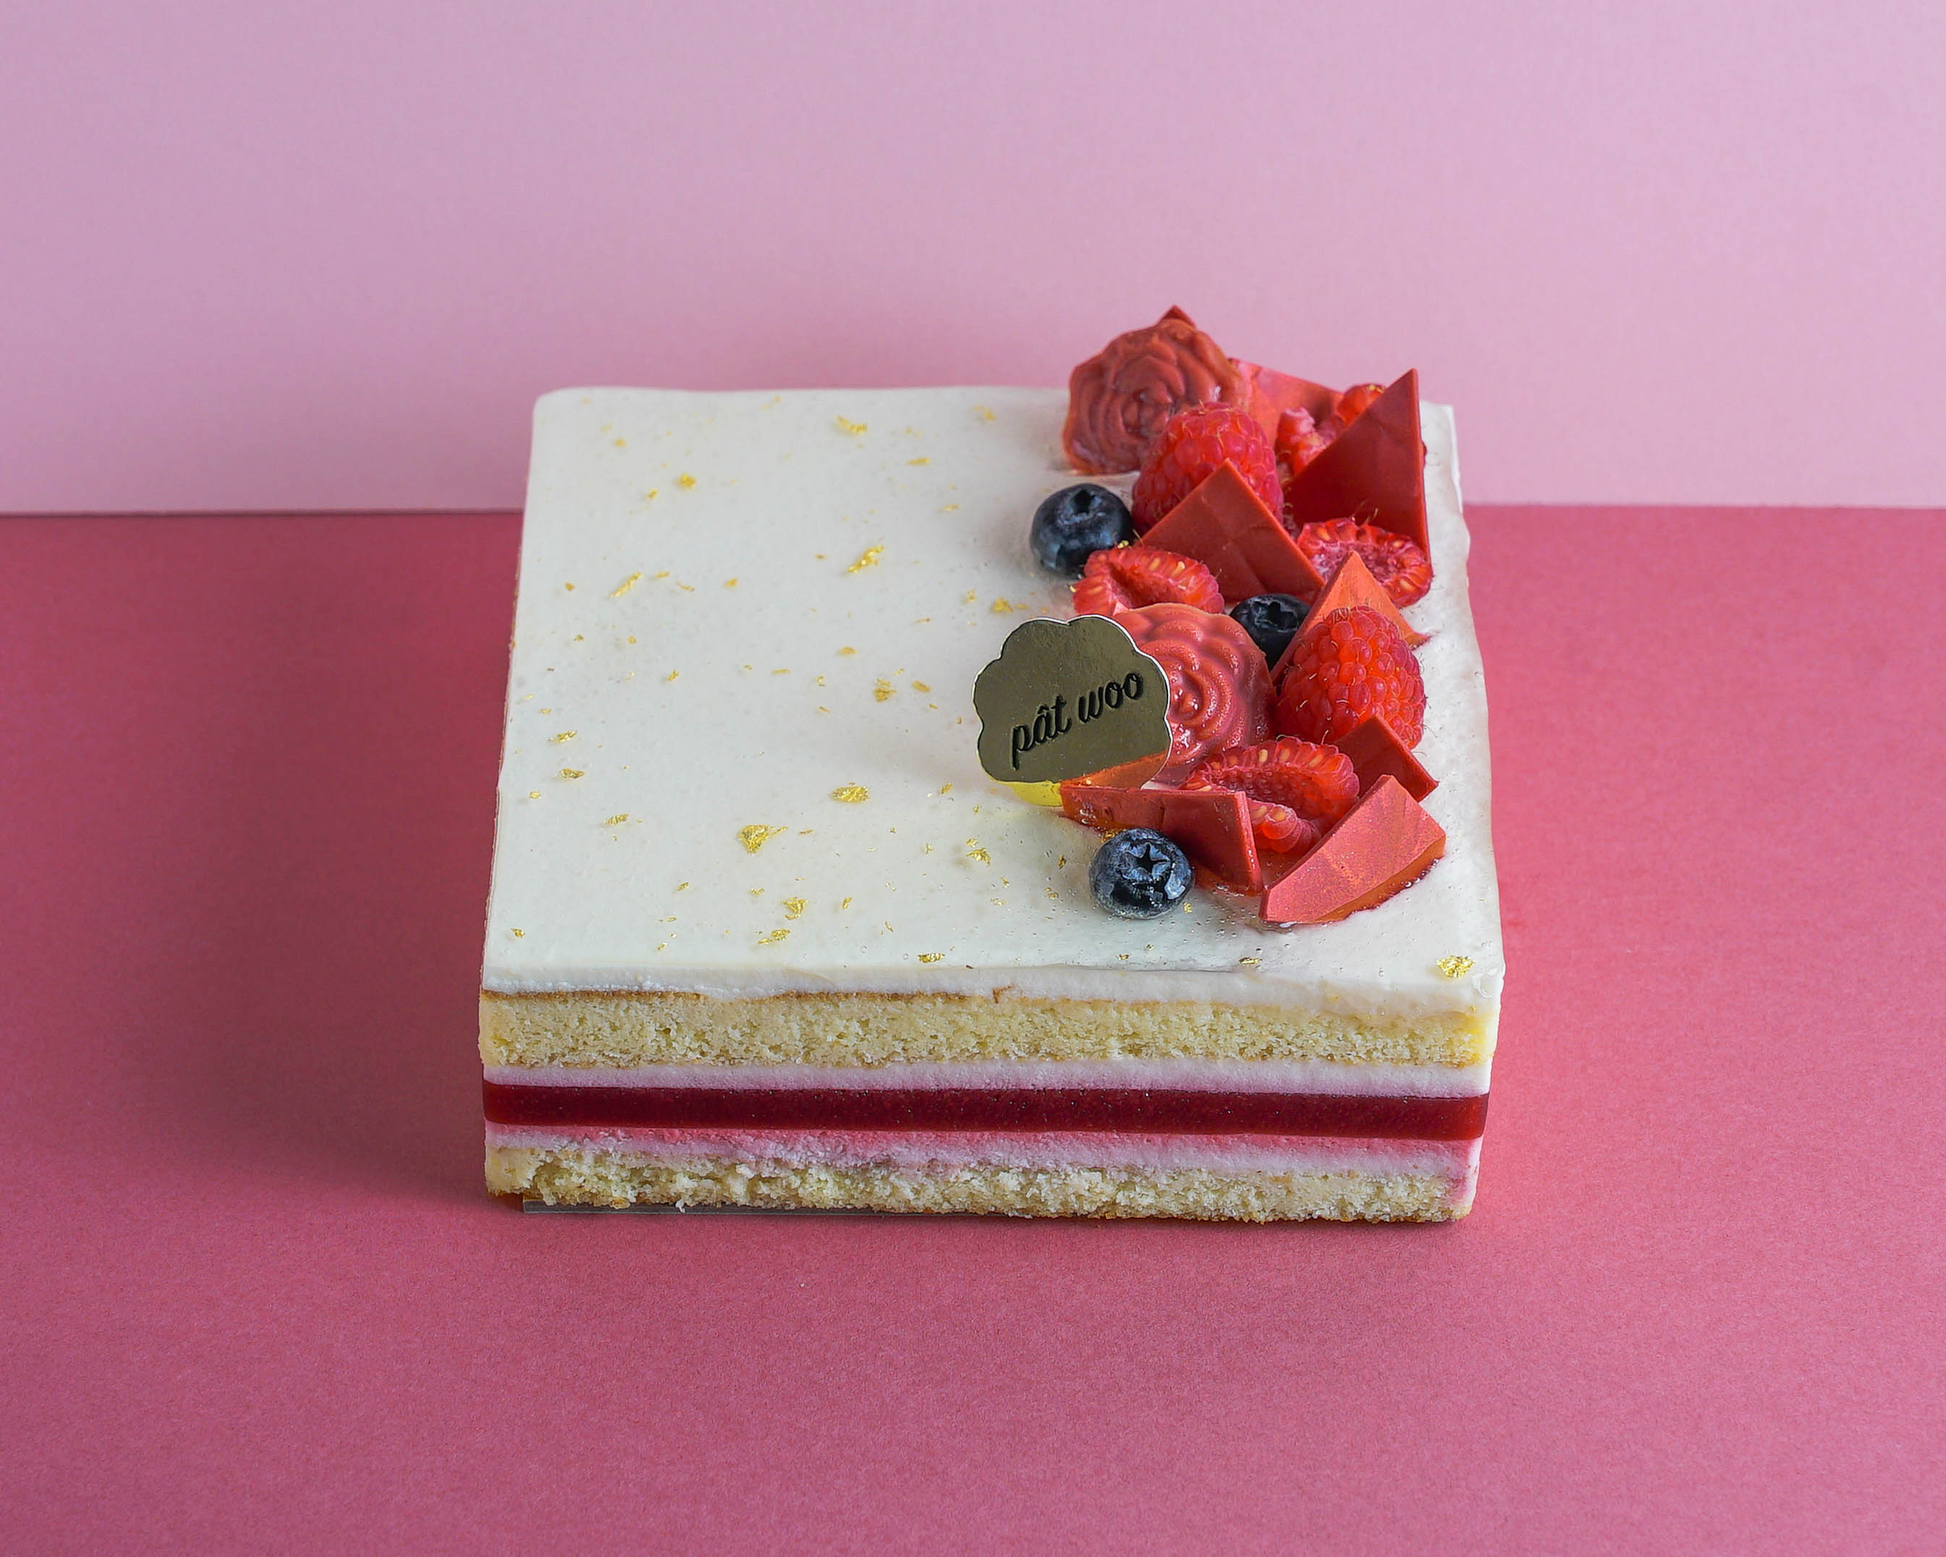 A delicate tri-flavoured layered cake decorated with raspberries and chocolate pieces. The tanginess of the raspberry jelly balances the sweeter rose-scented almond sponge cake and the fruity scent of the lychee mousse. A favourite among those with a sweet tooth!